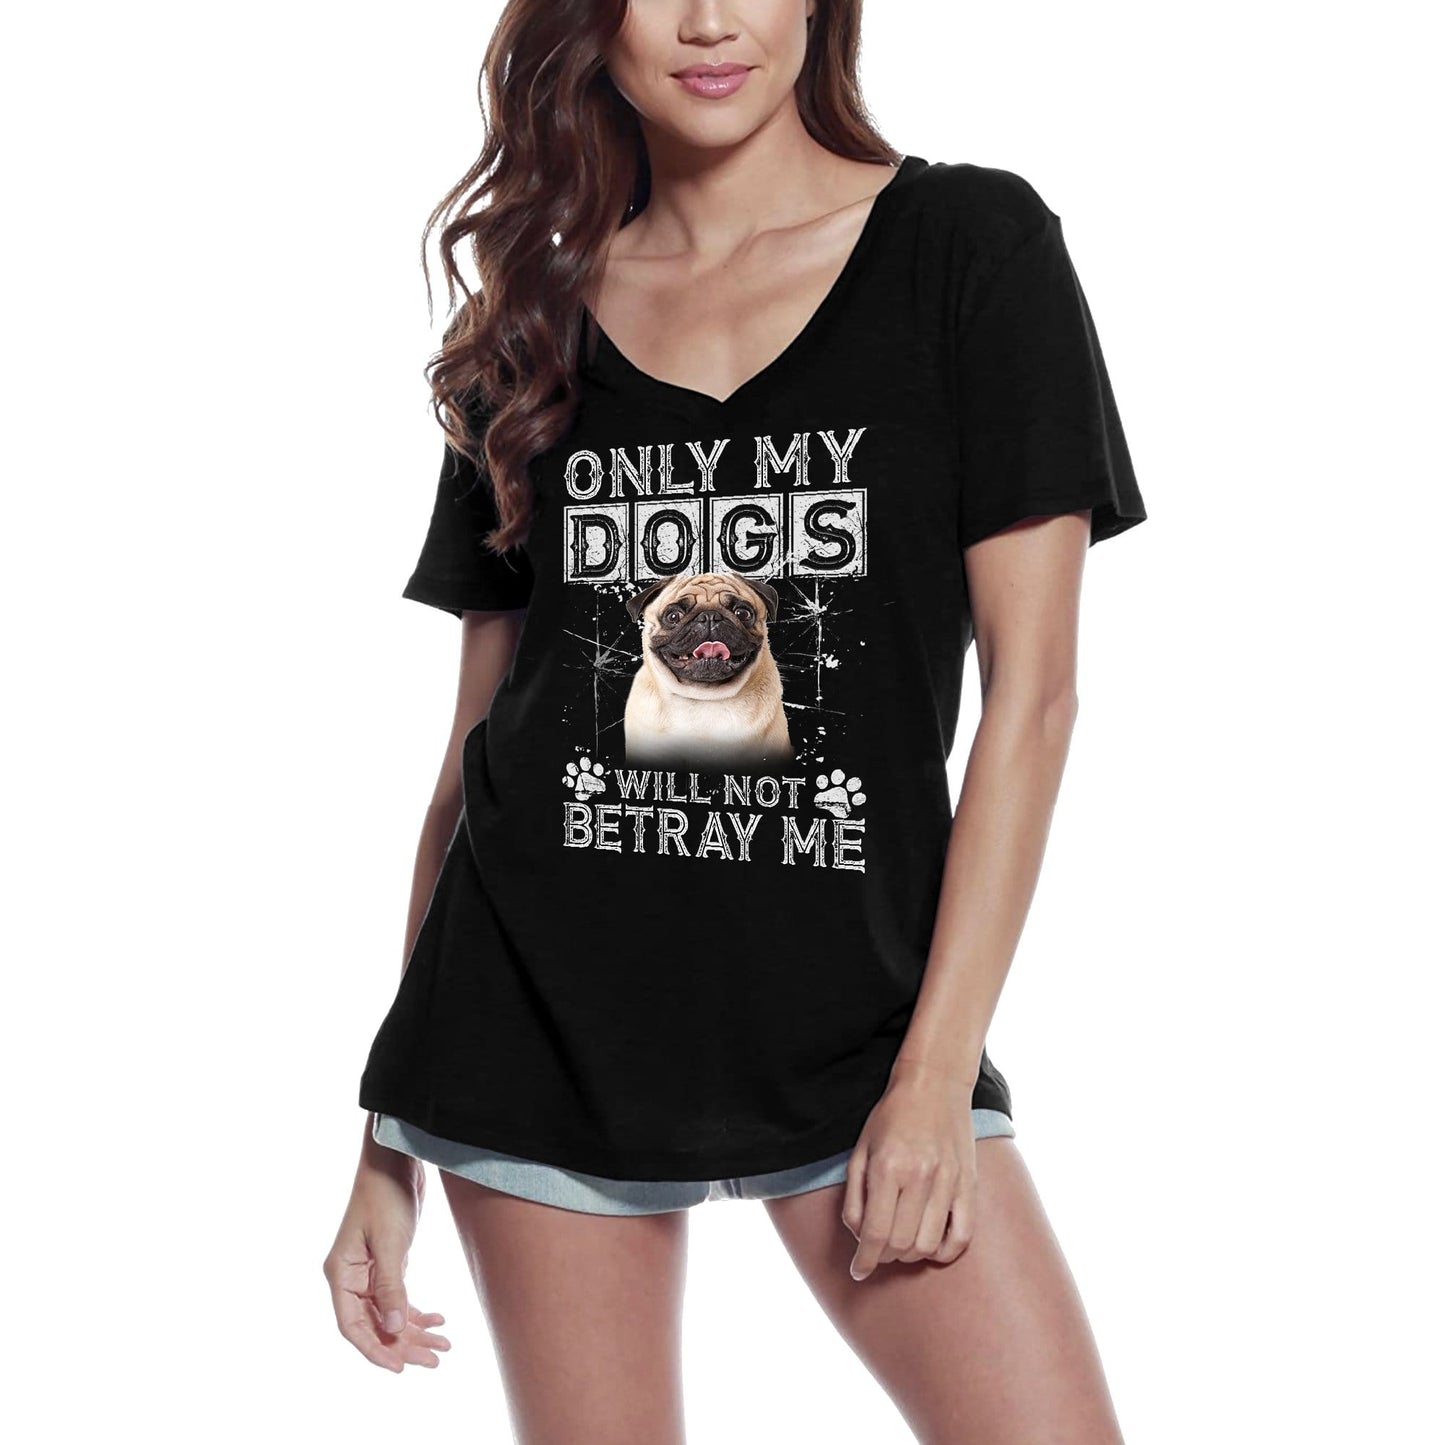 ULTRABASIC Women's T-Shirt Only My Dogs Will Not Betray Me - Pug Cute Dog Paw